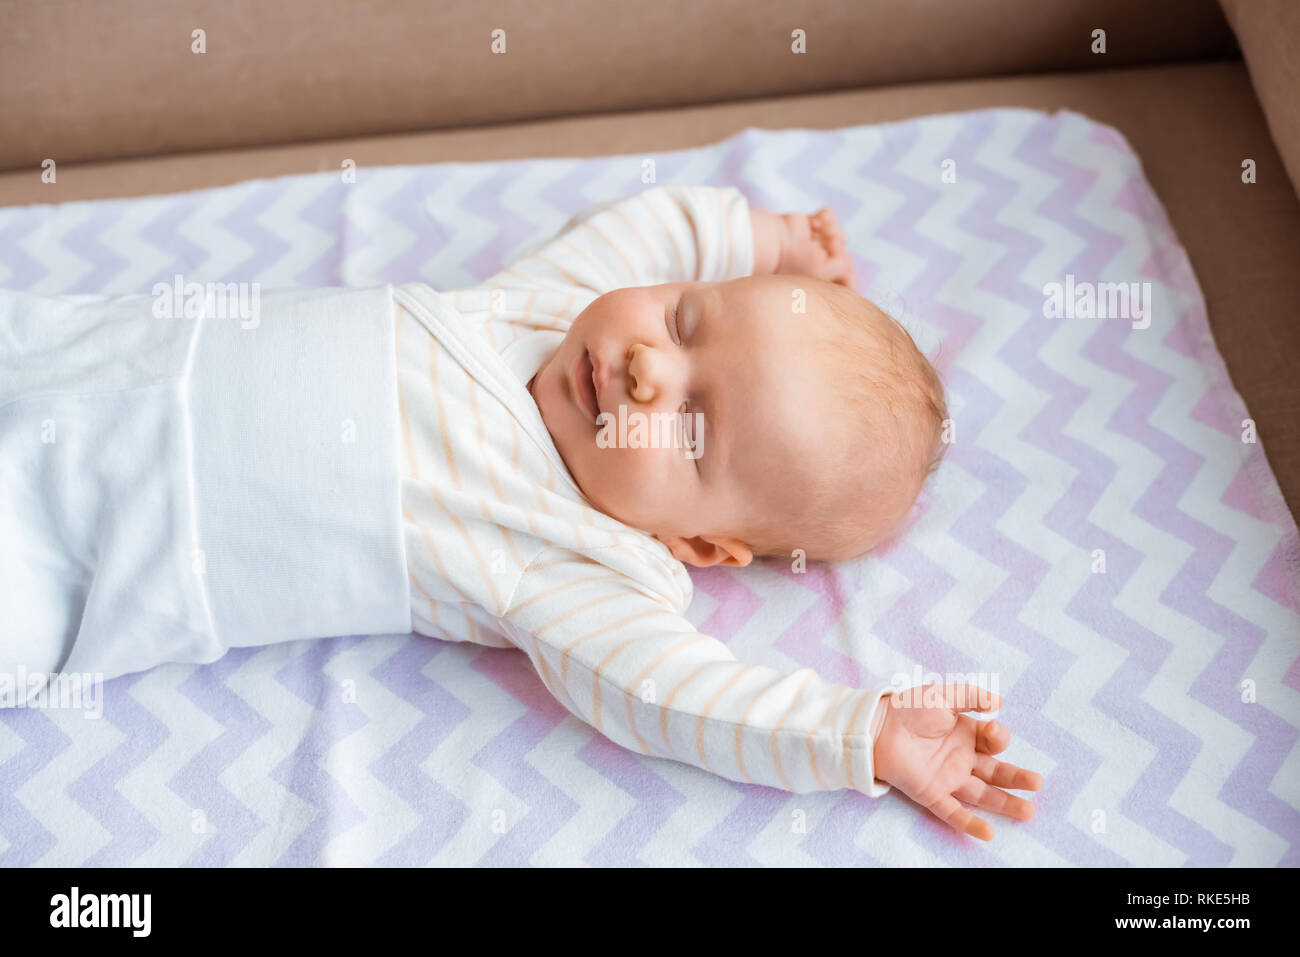 adorable newborn baby with closed eyes and raised hands lying on sofa Stock Photo